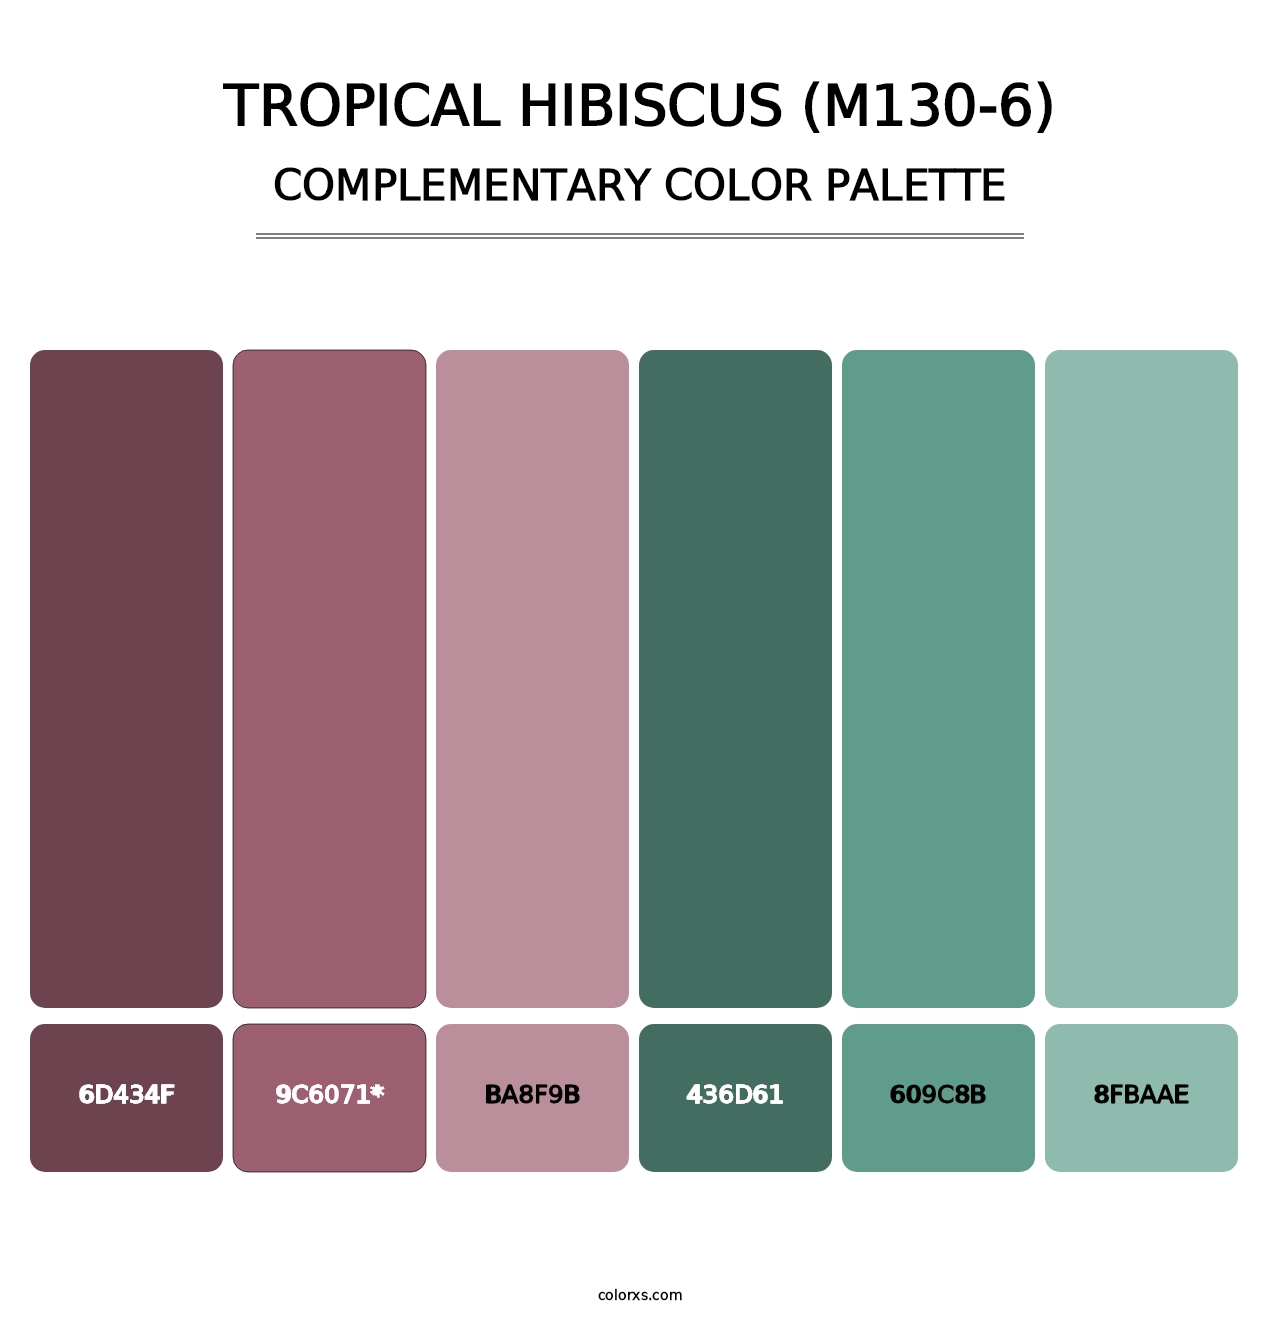 Tropical Hibiscus (M130-6) - Complementary Color Palette